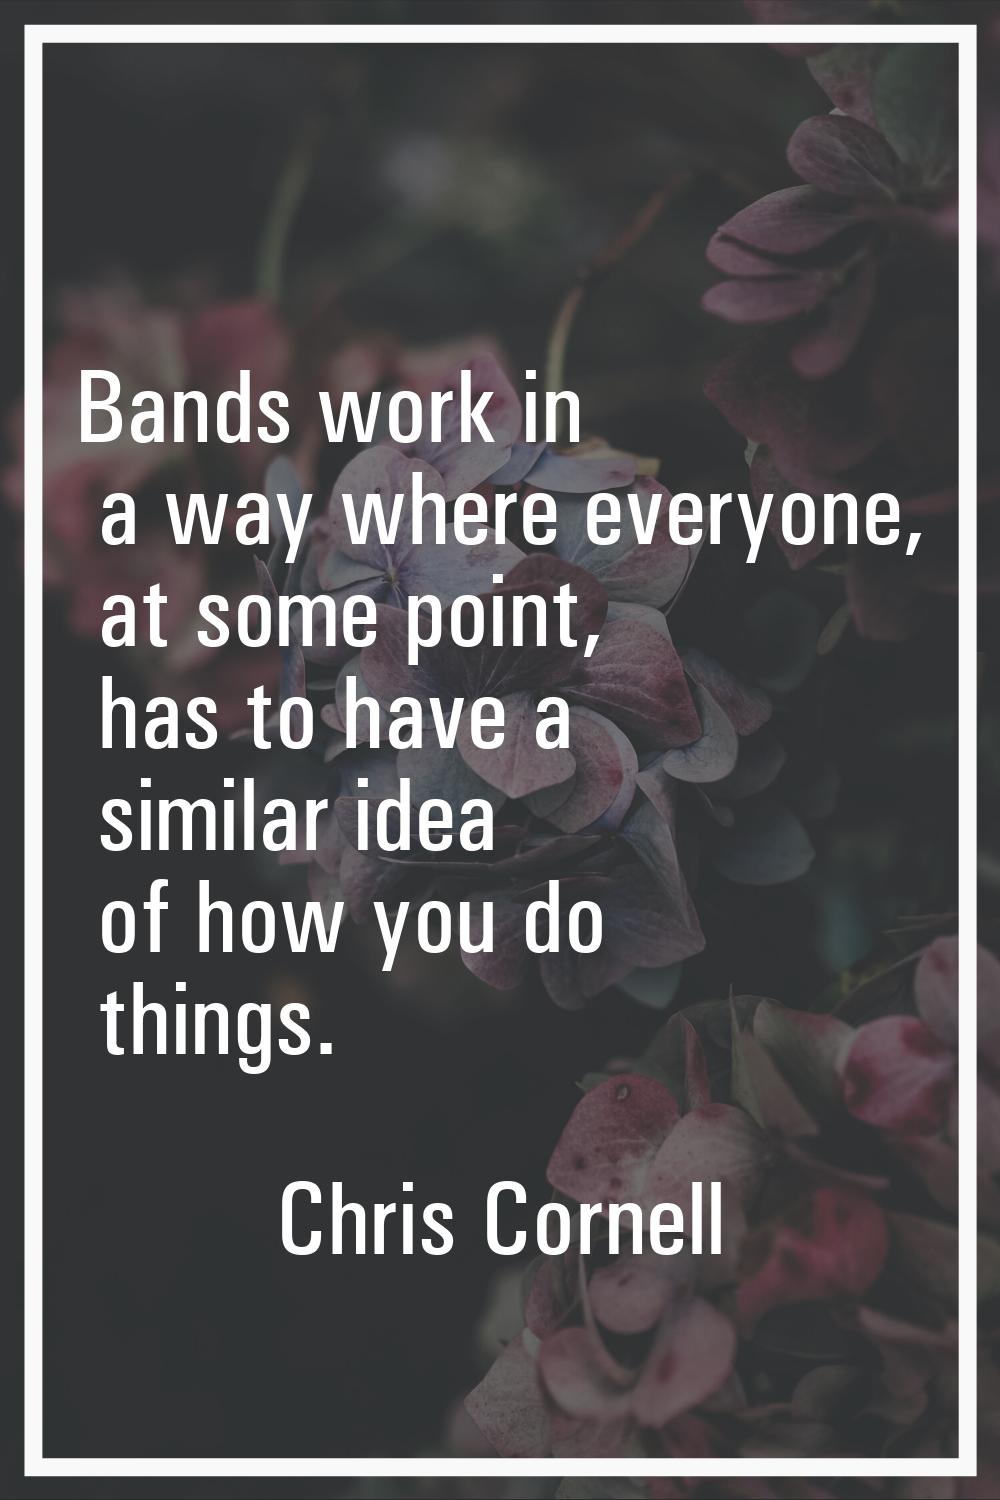 Bands work in a way where everyone, at some point, has to have a similar idea of how you do things.